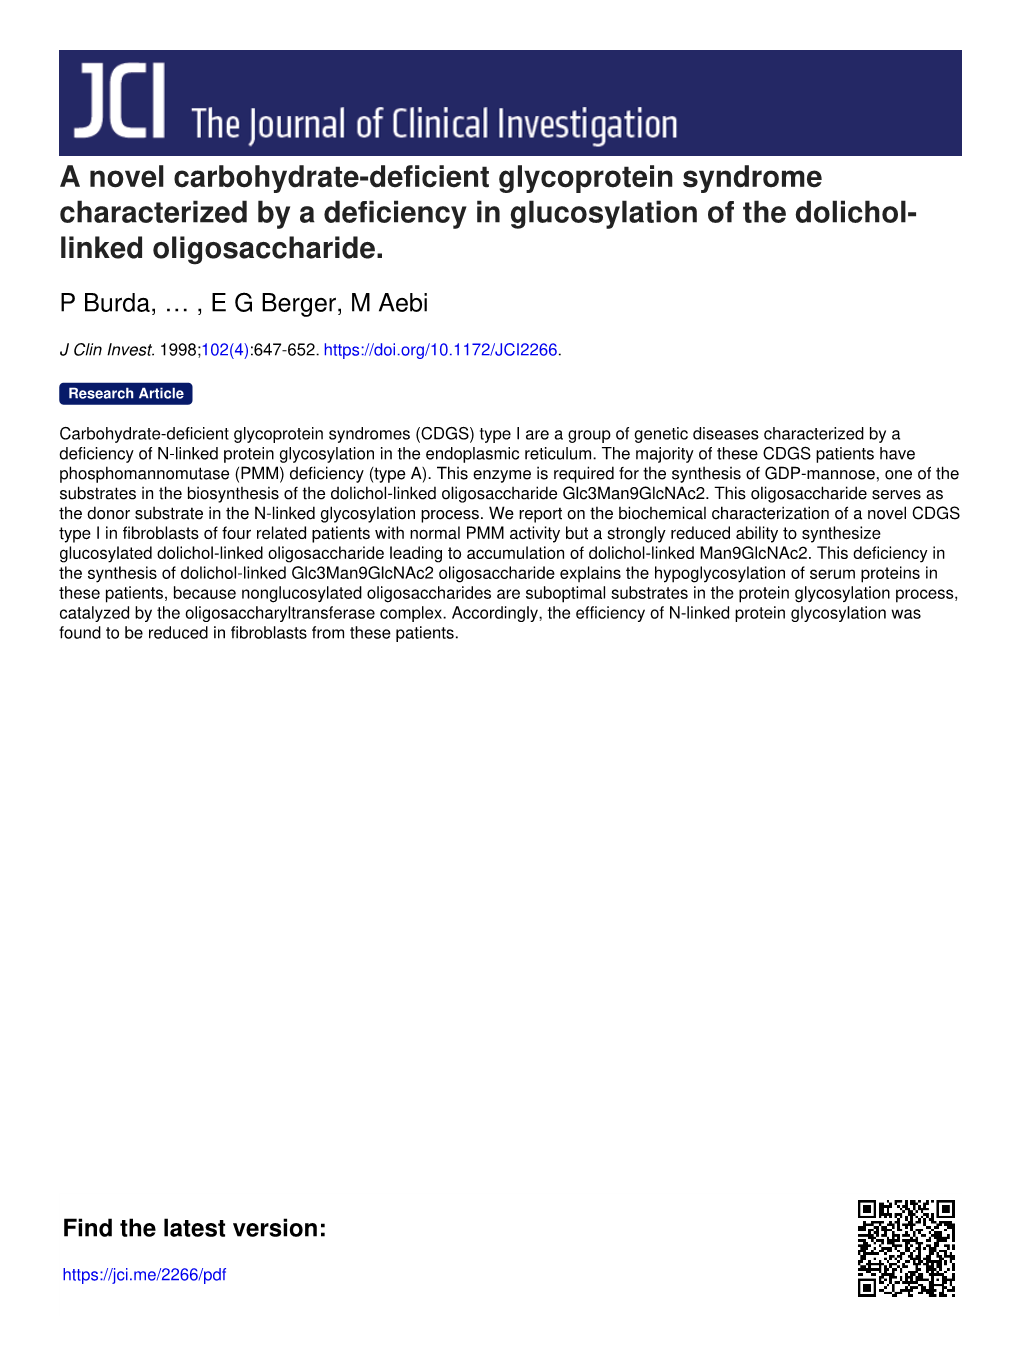 A Novel Carbohydrate-Deficient Glycoprotein Syndrome Characterized by a Deficiency in Glucosylation of the Dolichol- Linked Oligosaccharide